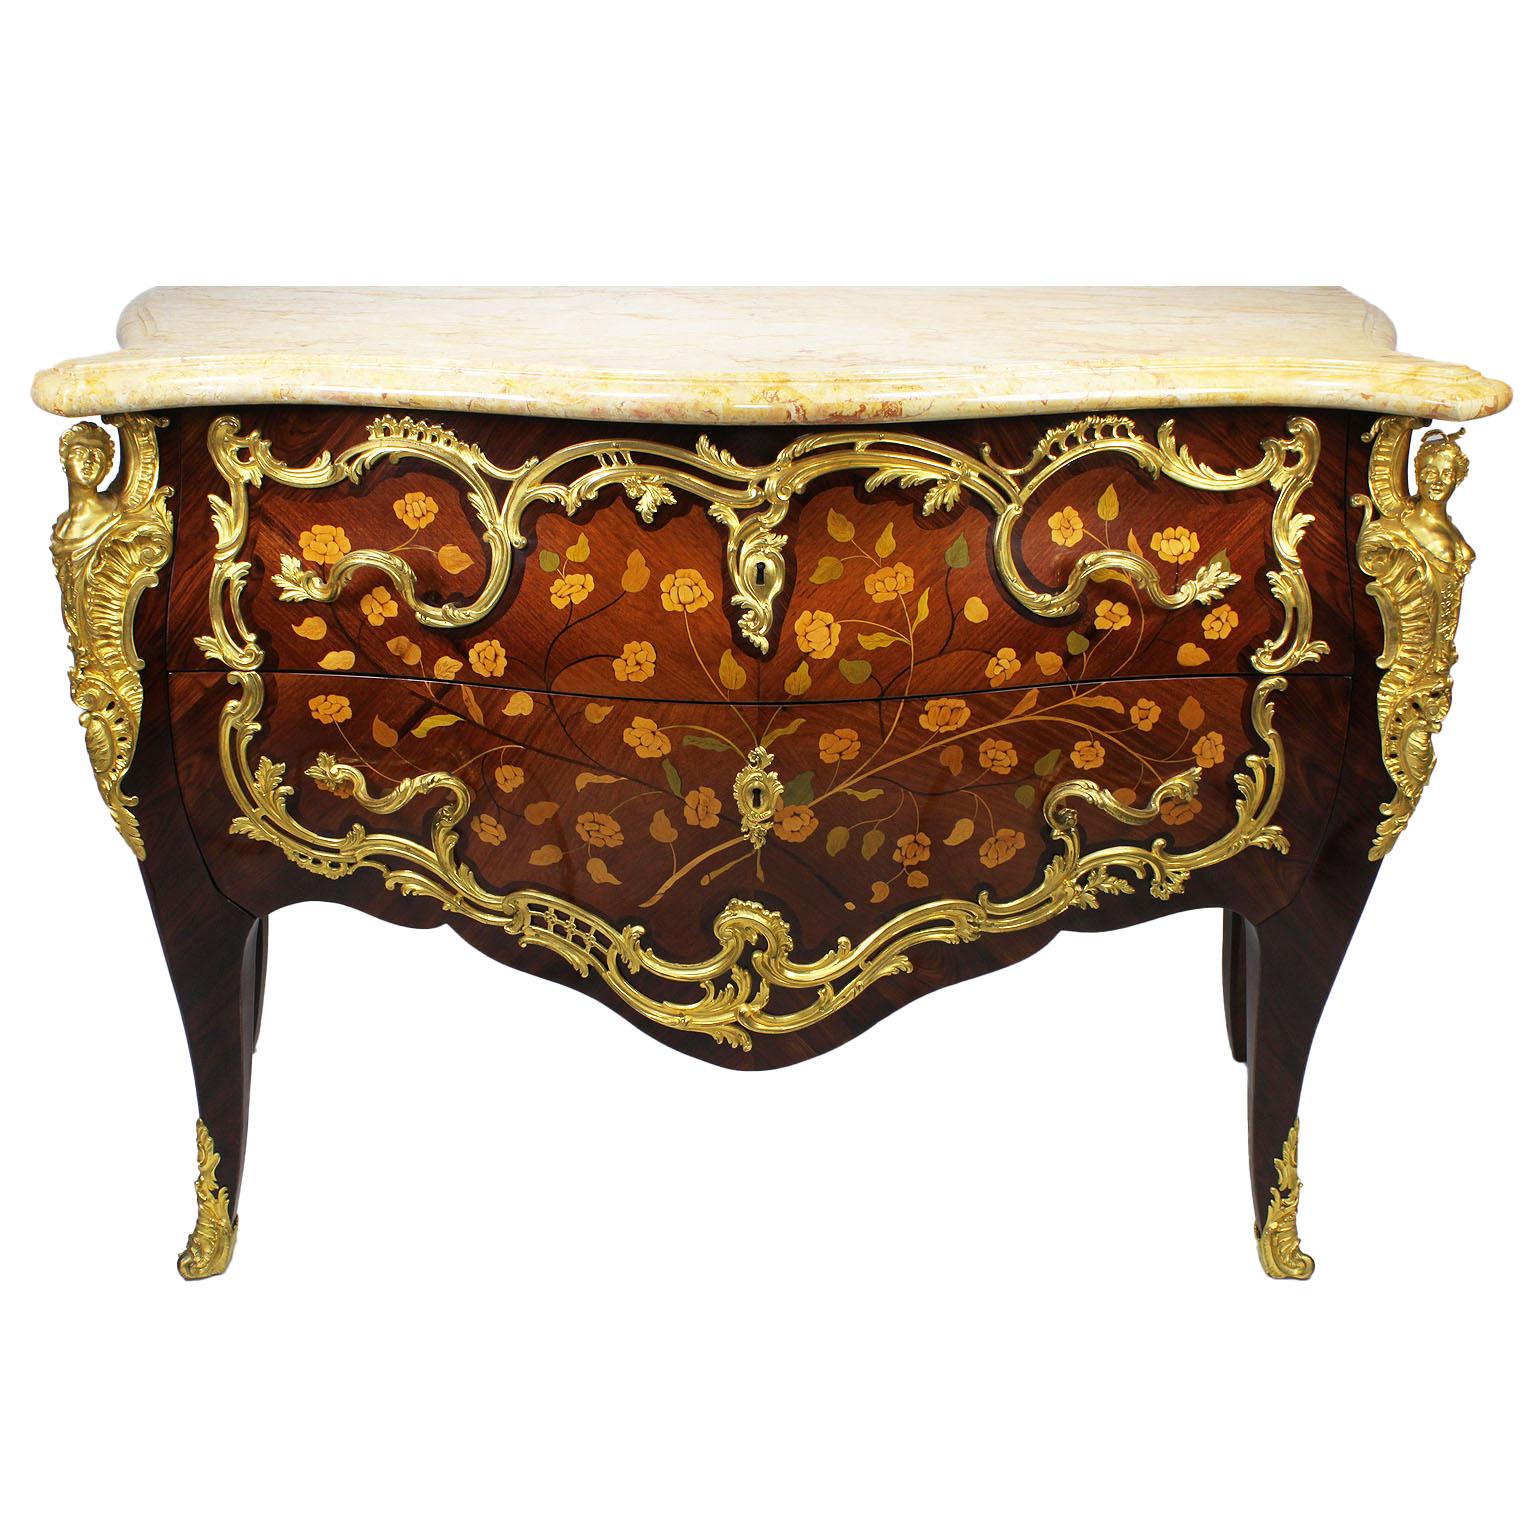 French 19th Century Louis XV Style Gilt Bronze-Mounted Marquetry Commodes, Pair In Good Condition For Sale In Los Angeles, CA